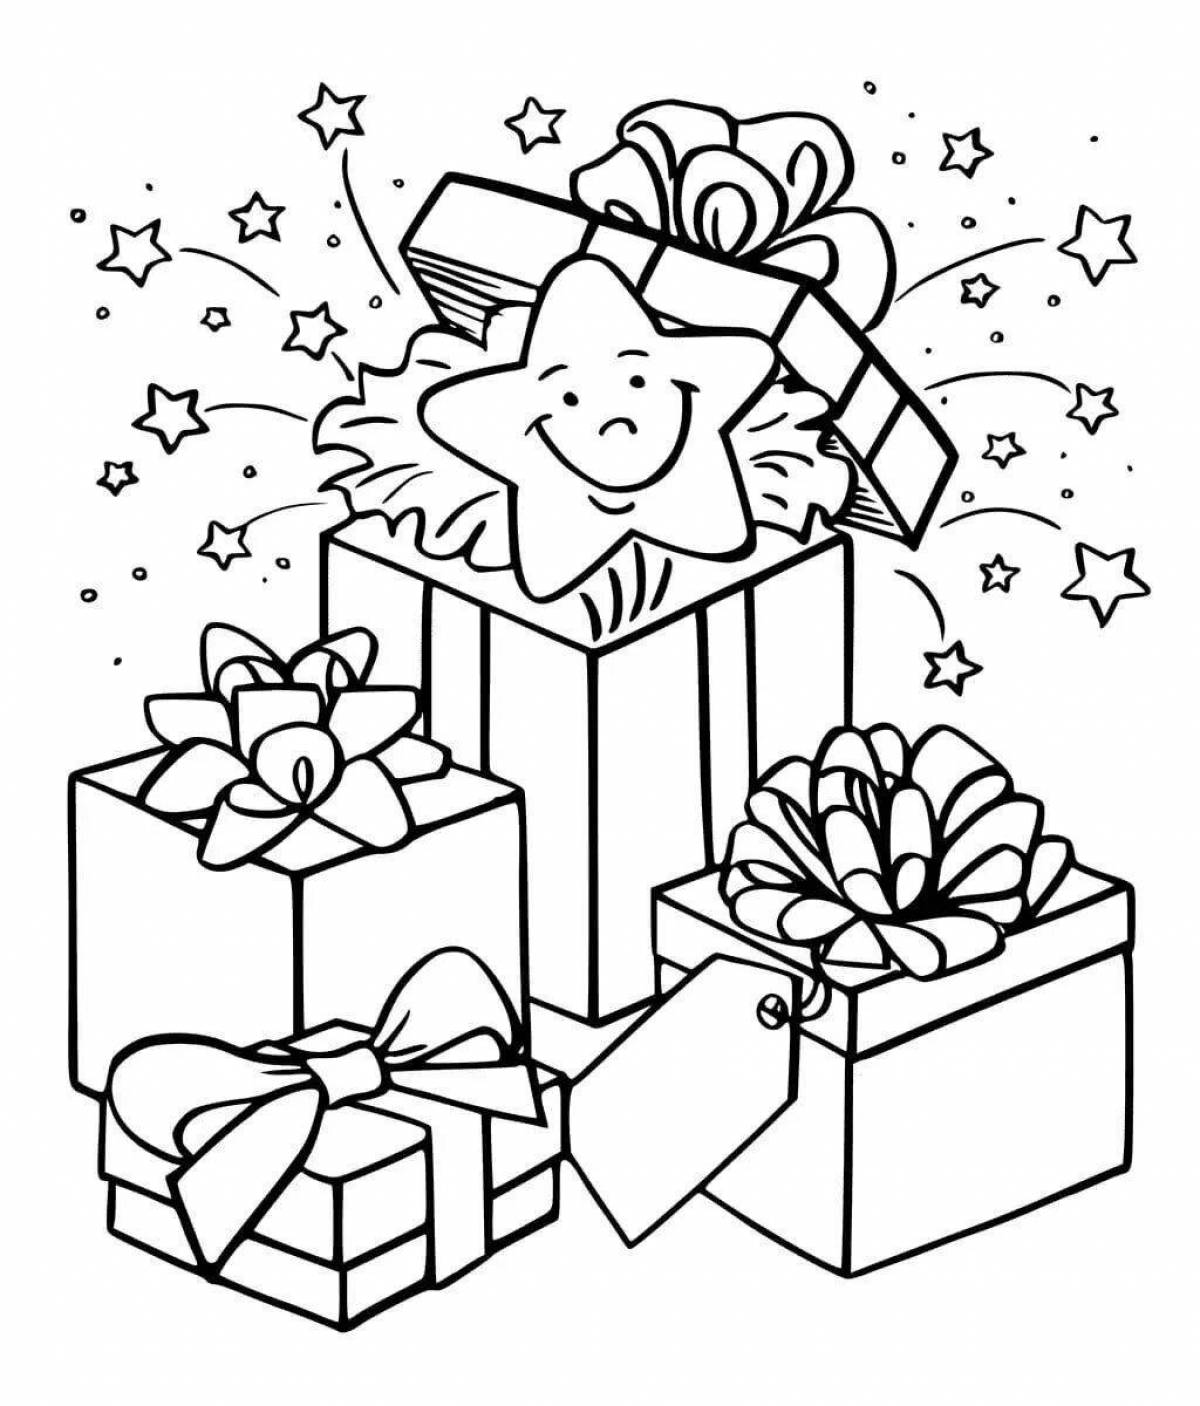 Coloring page adorable birthday present